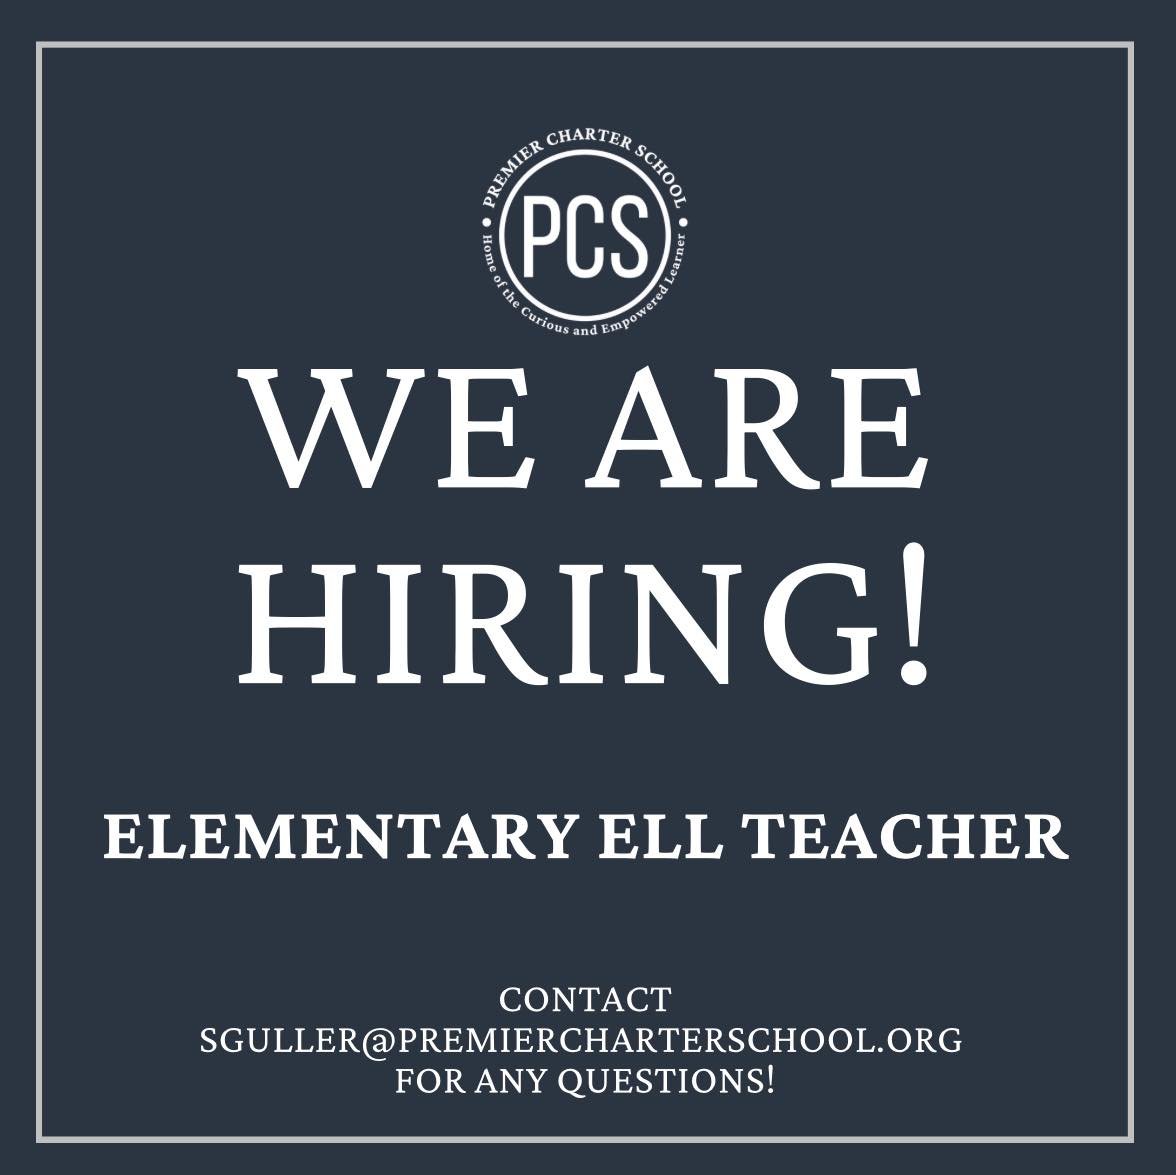 CALLING ALL EDUCATORS&mdash;
Premier Charter School is hiring an Elementary ELL Teacher for the 2024-2025 school year! 

This ELL teacher will be part of an ELL Teacher team (3 in Elementary and 1 in middle school) and will be co-teaching in multiple